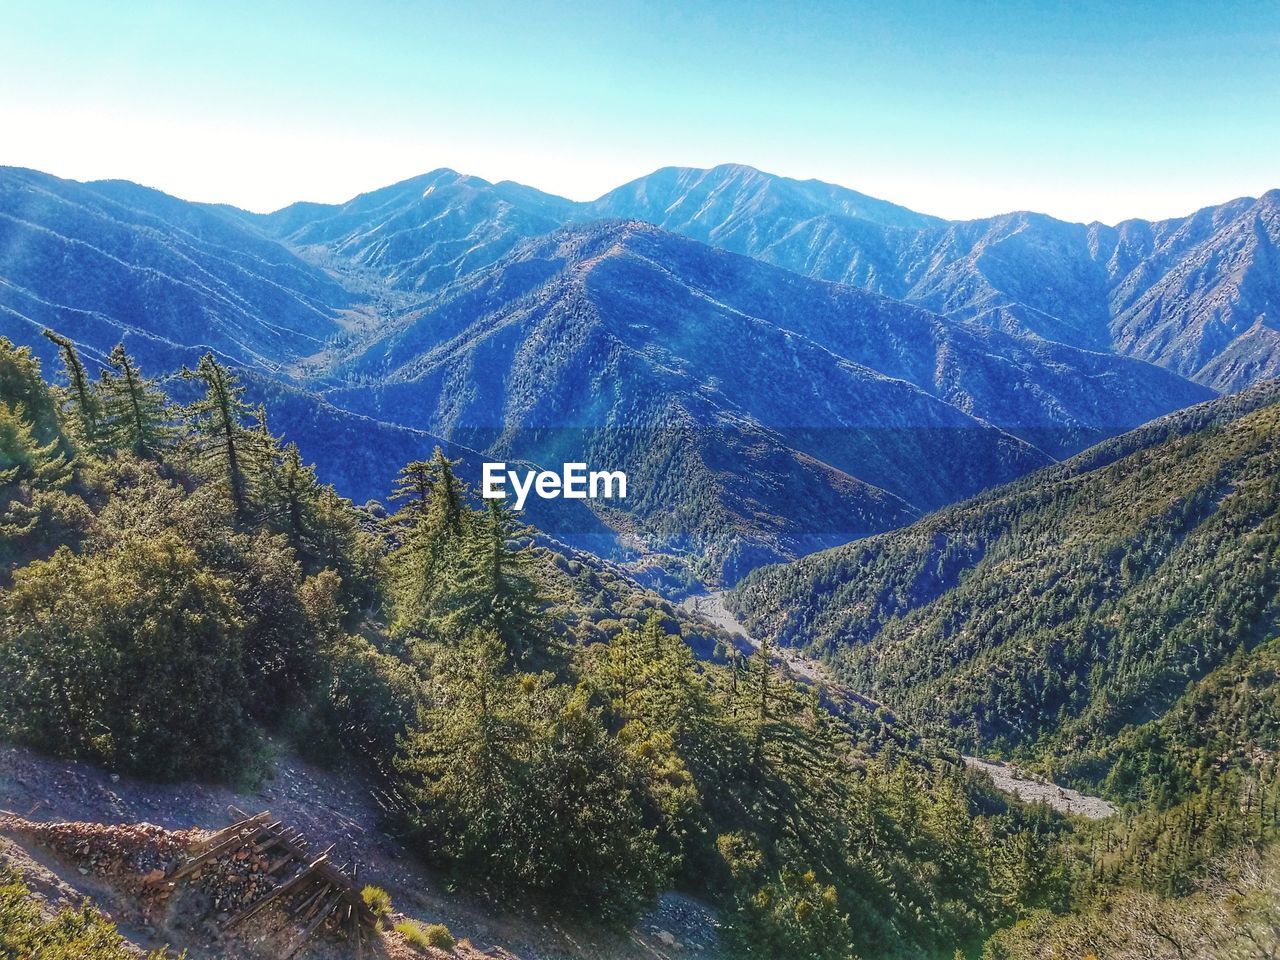 PANORAMIC VIEW OF MOUNTAINS AGAINST CLEAR SKY